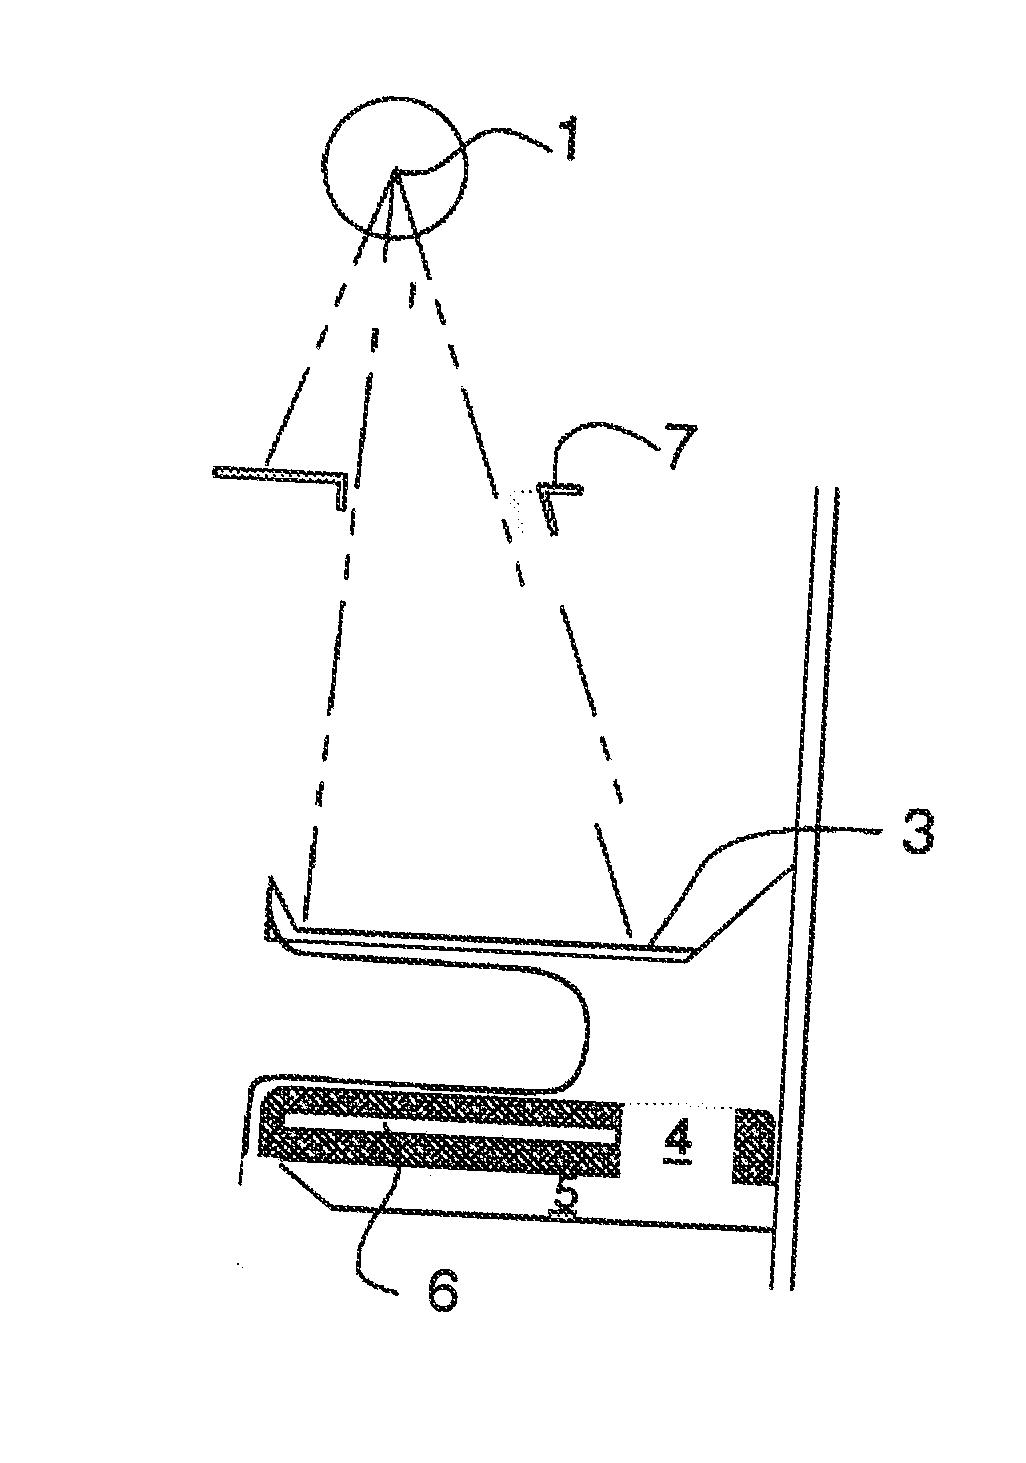 Mammography systems and methods, including methods utilizing breast sound comparision